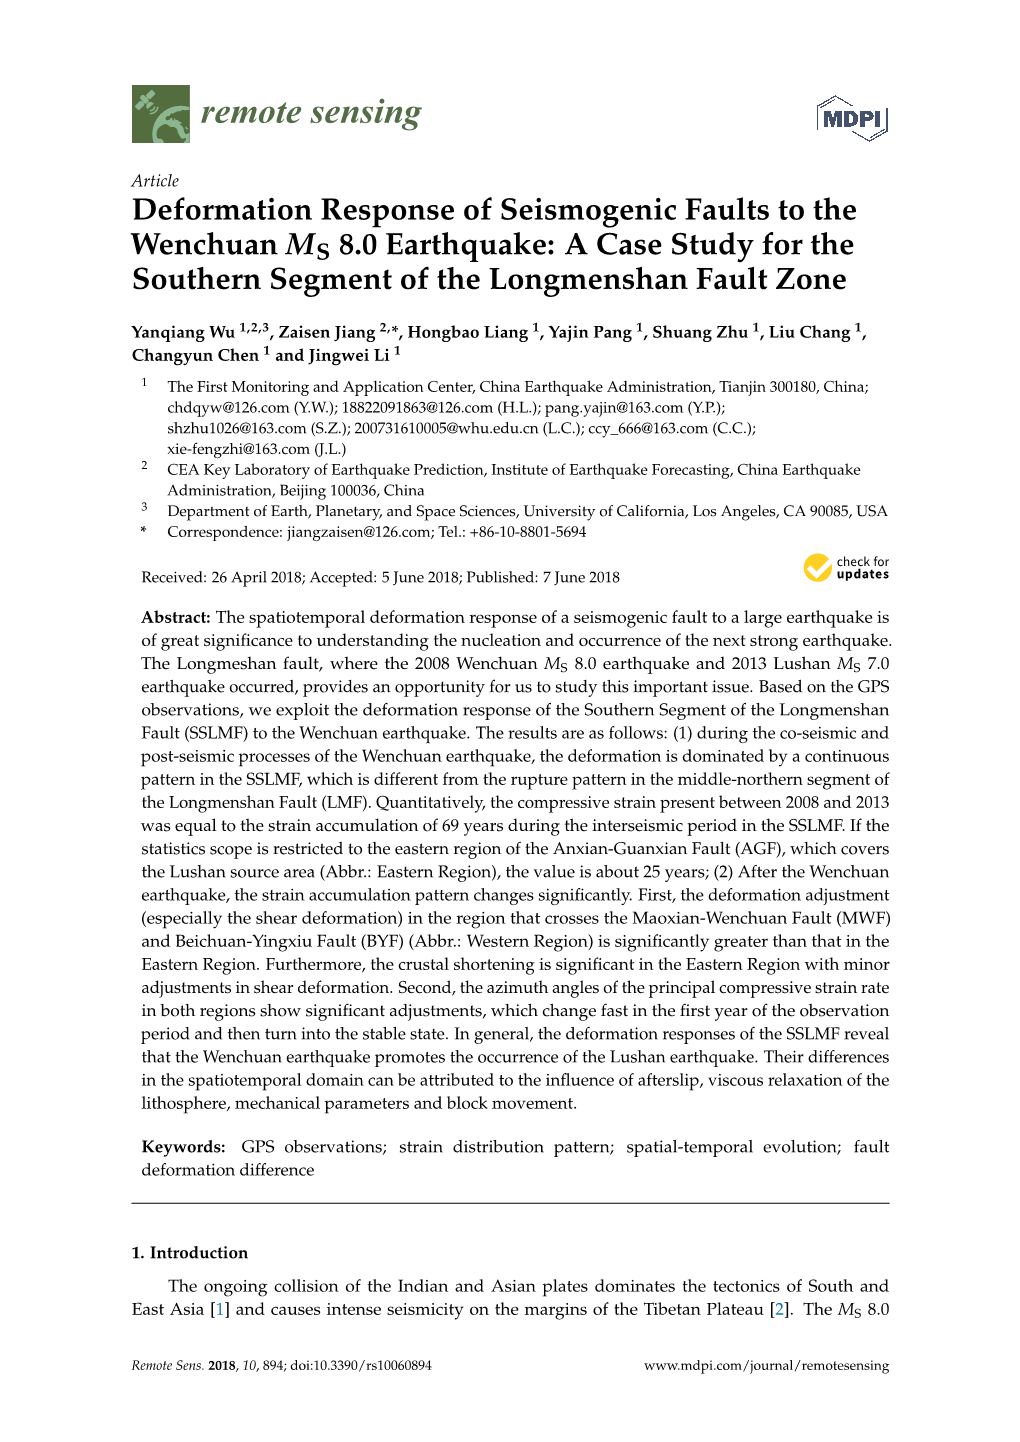 Deformation Response of Seismogenic Faults to the Wenchuan MS 8.0 Earthquake: a Case Study for the Southern Segment of the Longmenshan Fault Zone